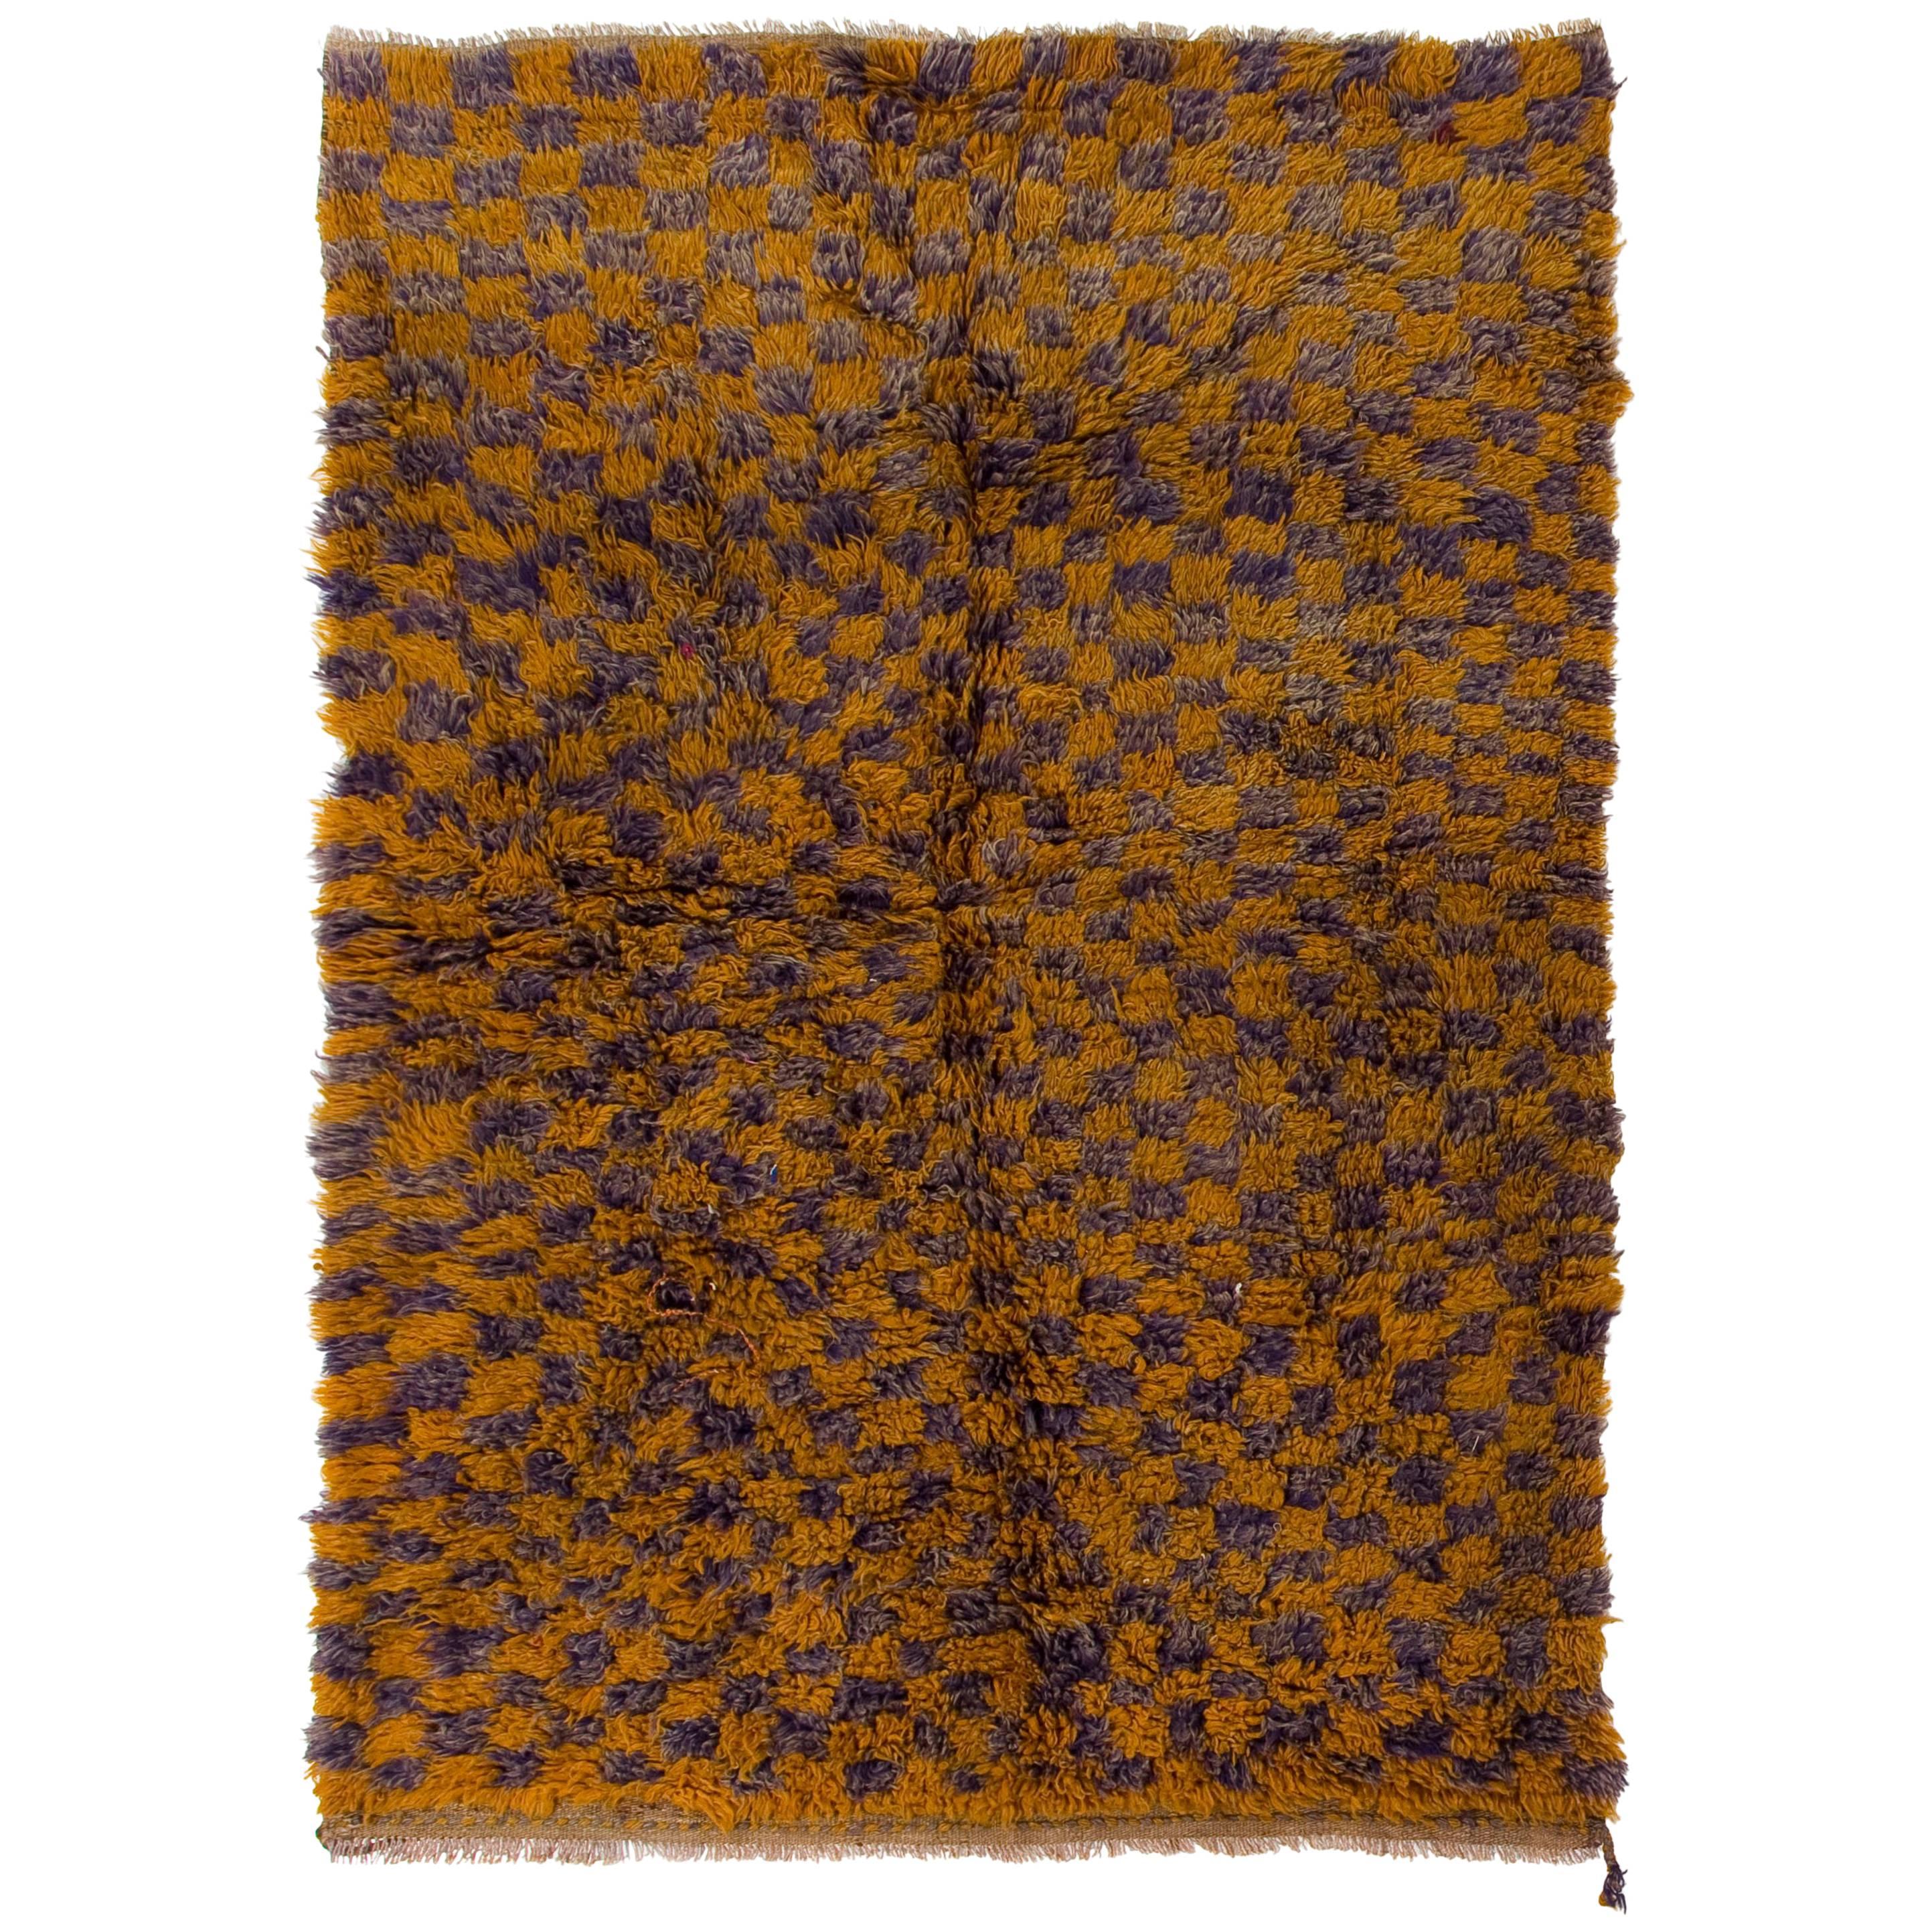 Checkered Midcentury "Tulu" Rug in Yellow and Lilac Colors